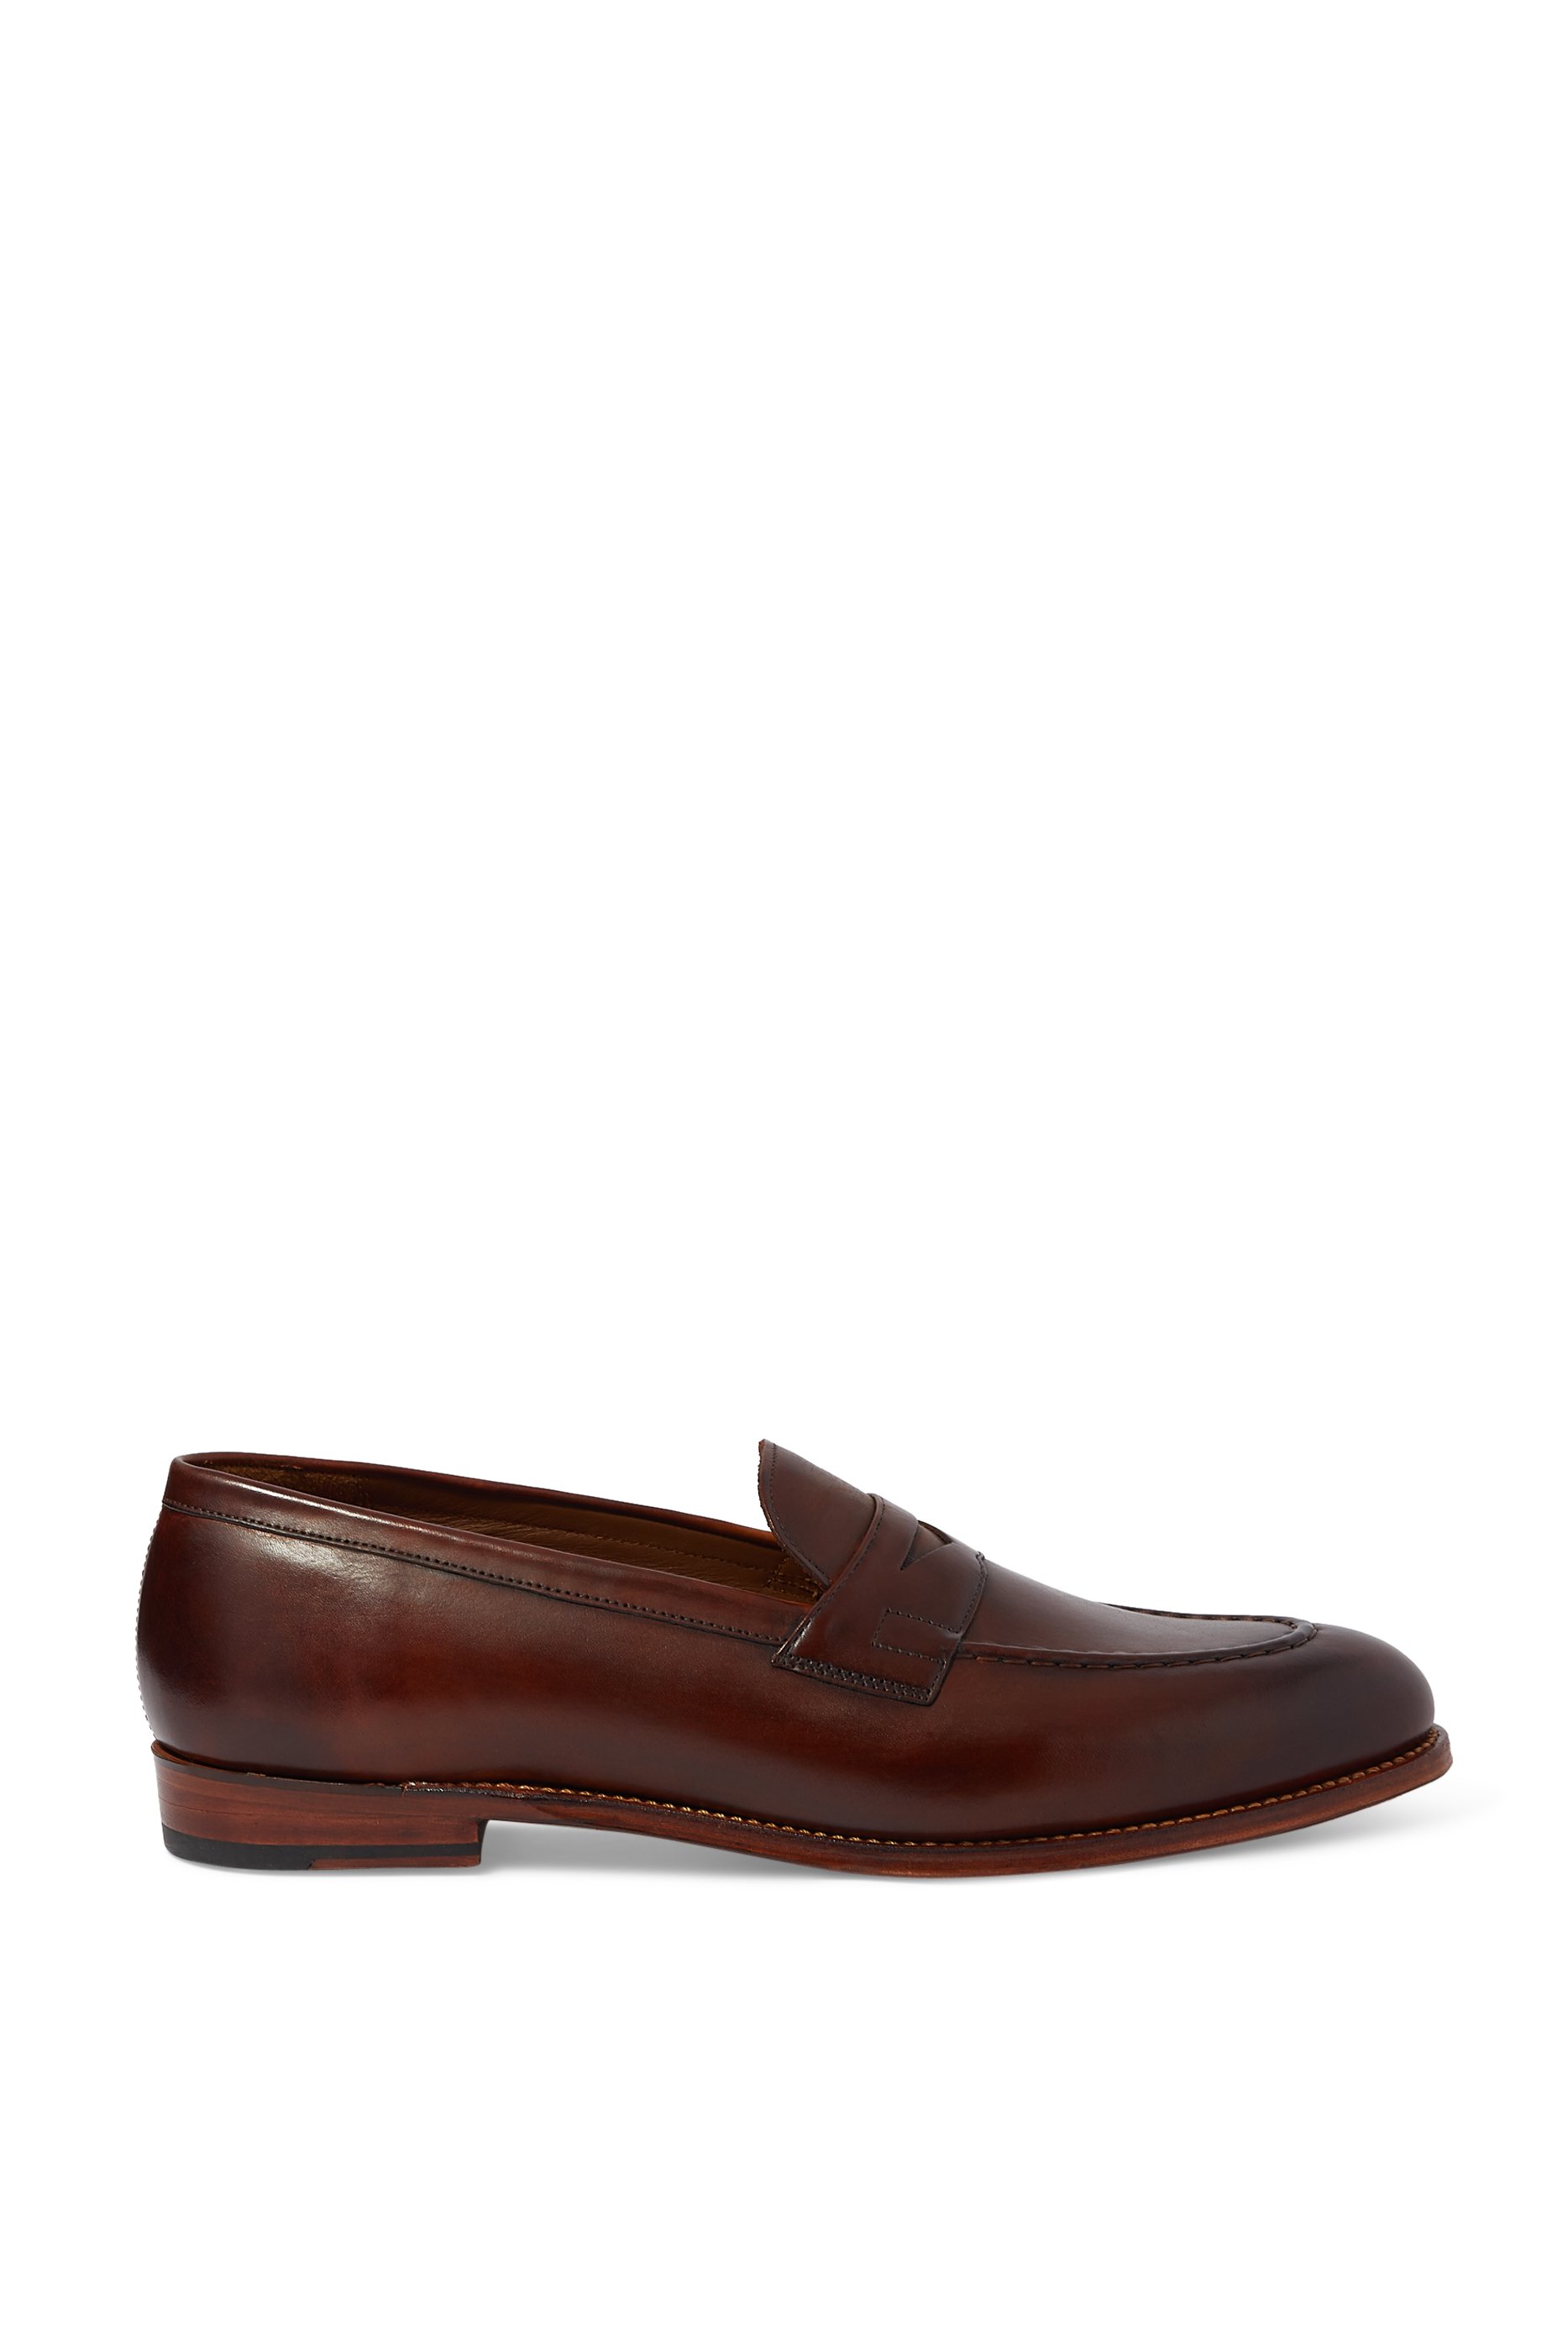 Buy Grenson Lloyd Leather Penny Loafers for Mens | Bloomingdale's UAE